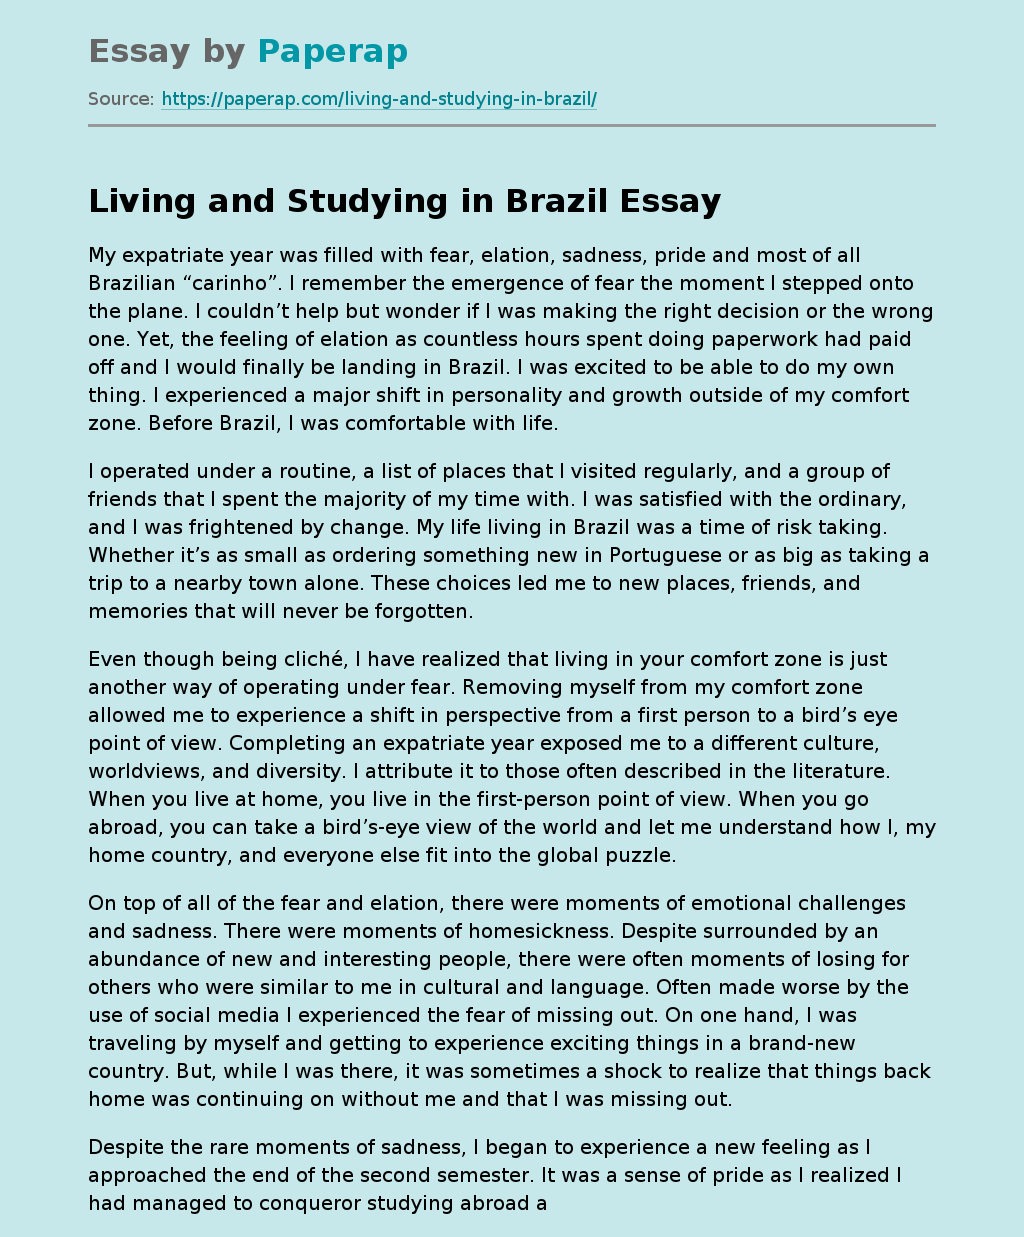 Living and Studying in Brazil